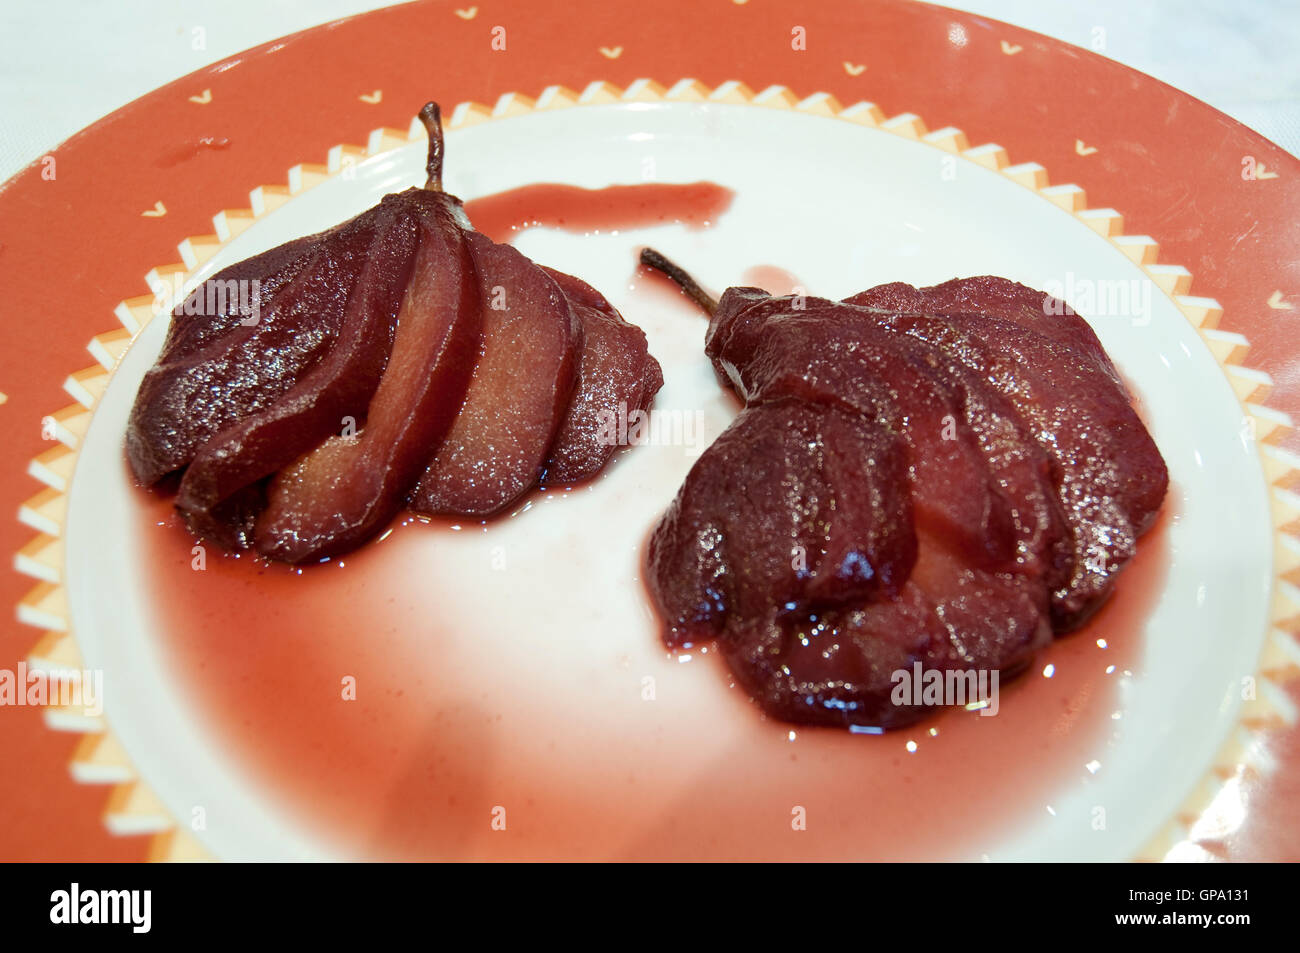 Red wine pears on a dish. Stock Photo